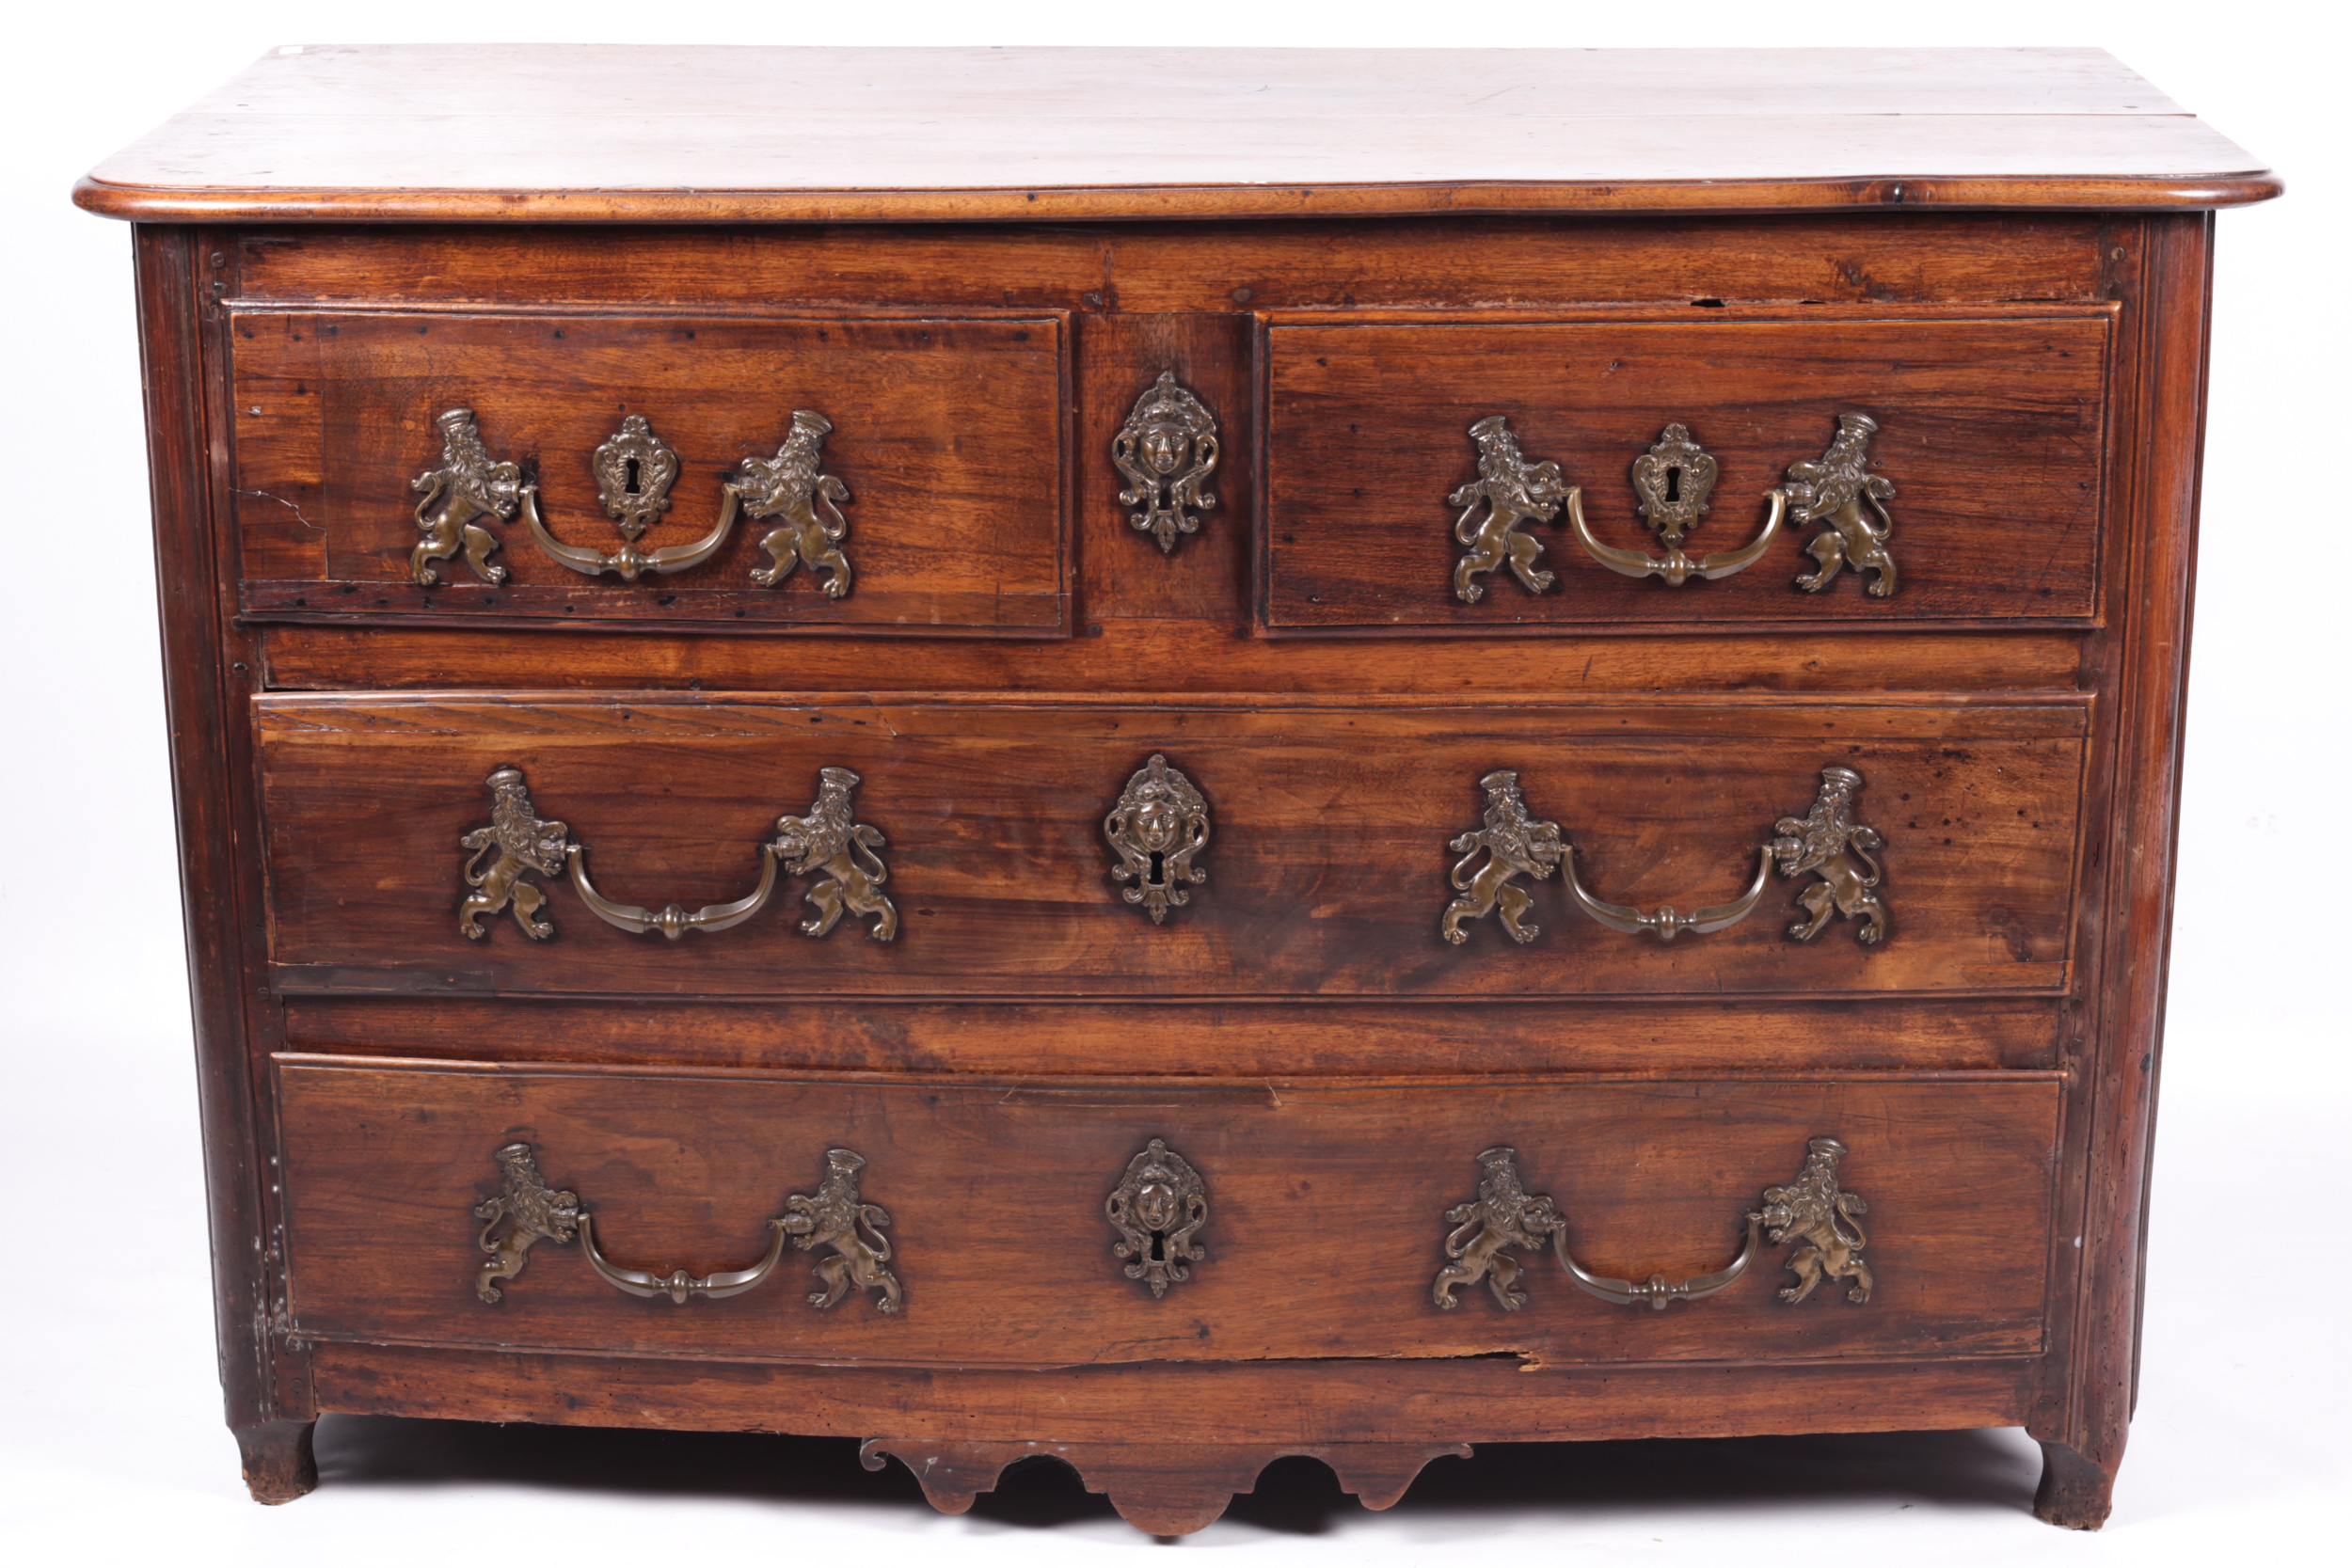 A 17th/18th century Continental walnut chest of drawers.